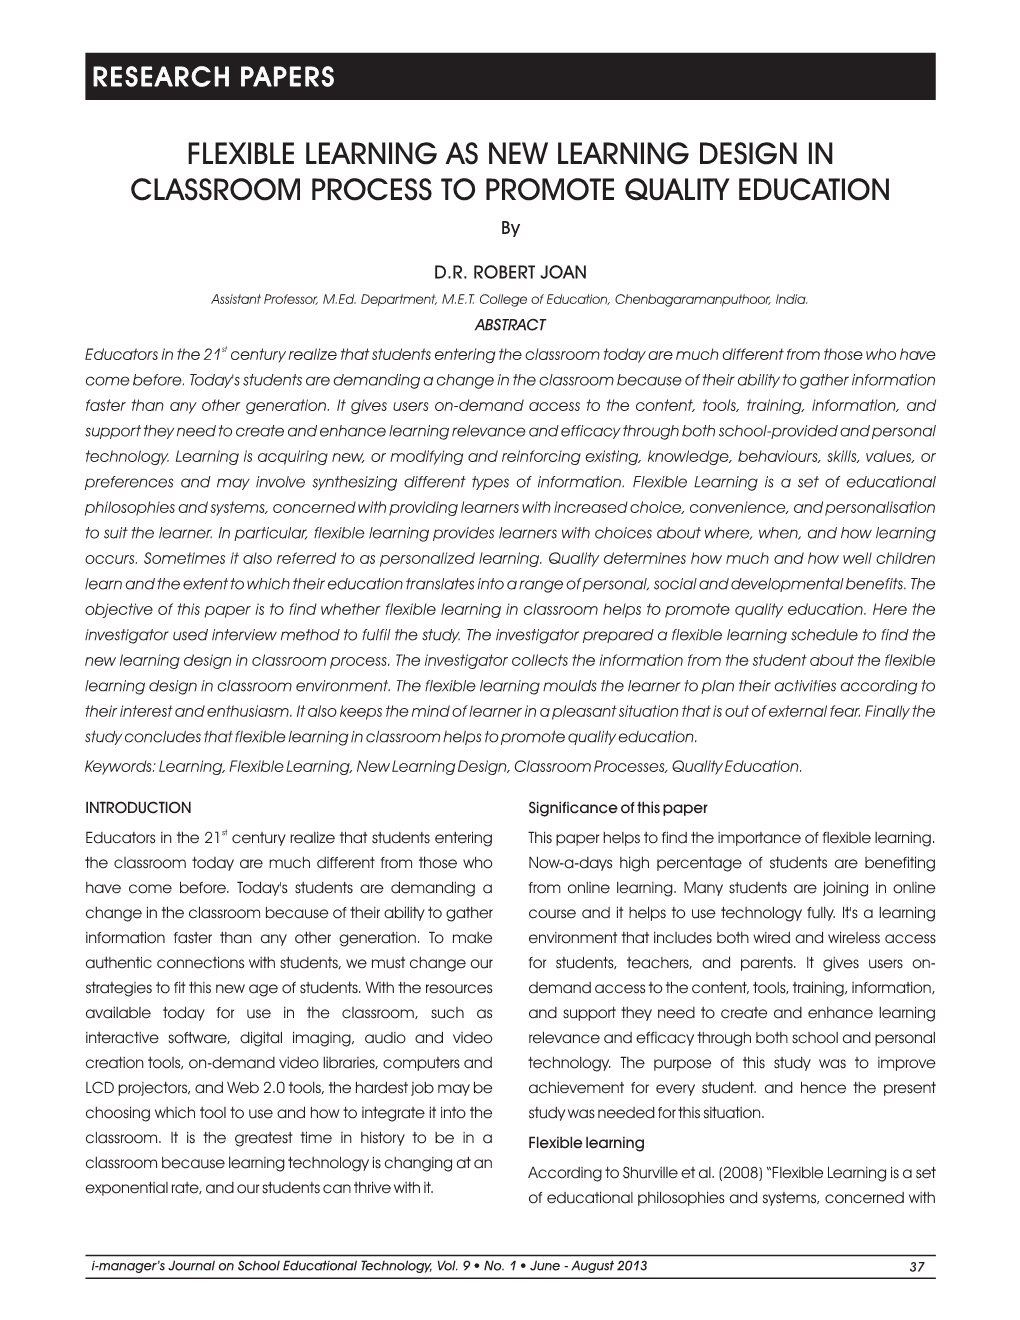 FLEXIBLE LEARNING AS NEW LEARNING DESIGN in CLASSROOM PROCESS to PROMOTE QUALITY EDUCATION By